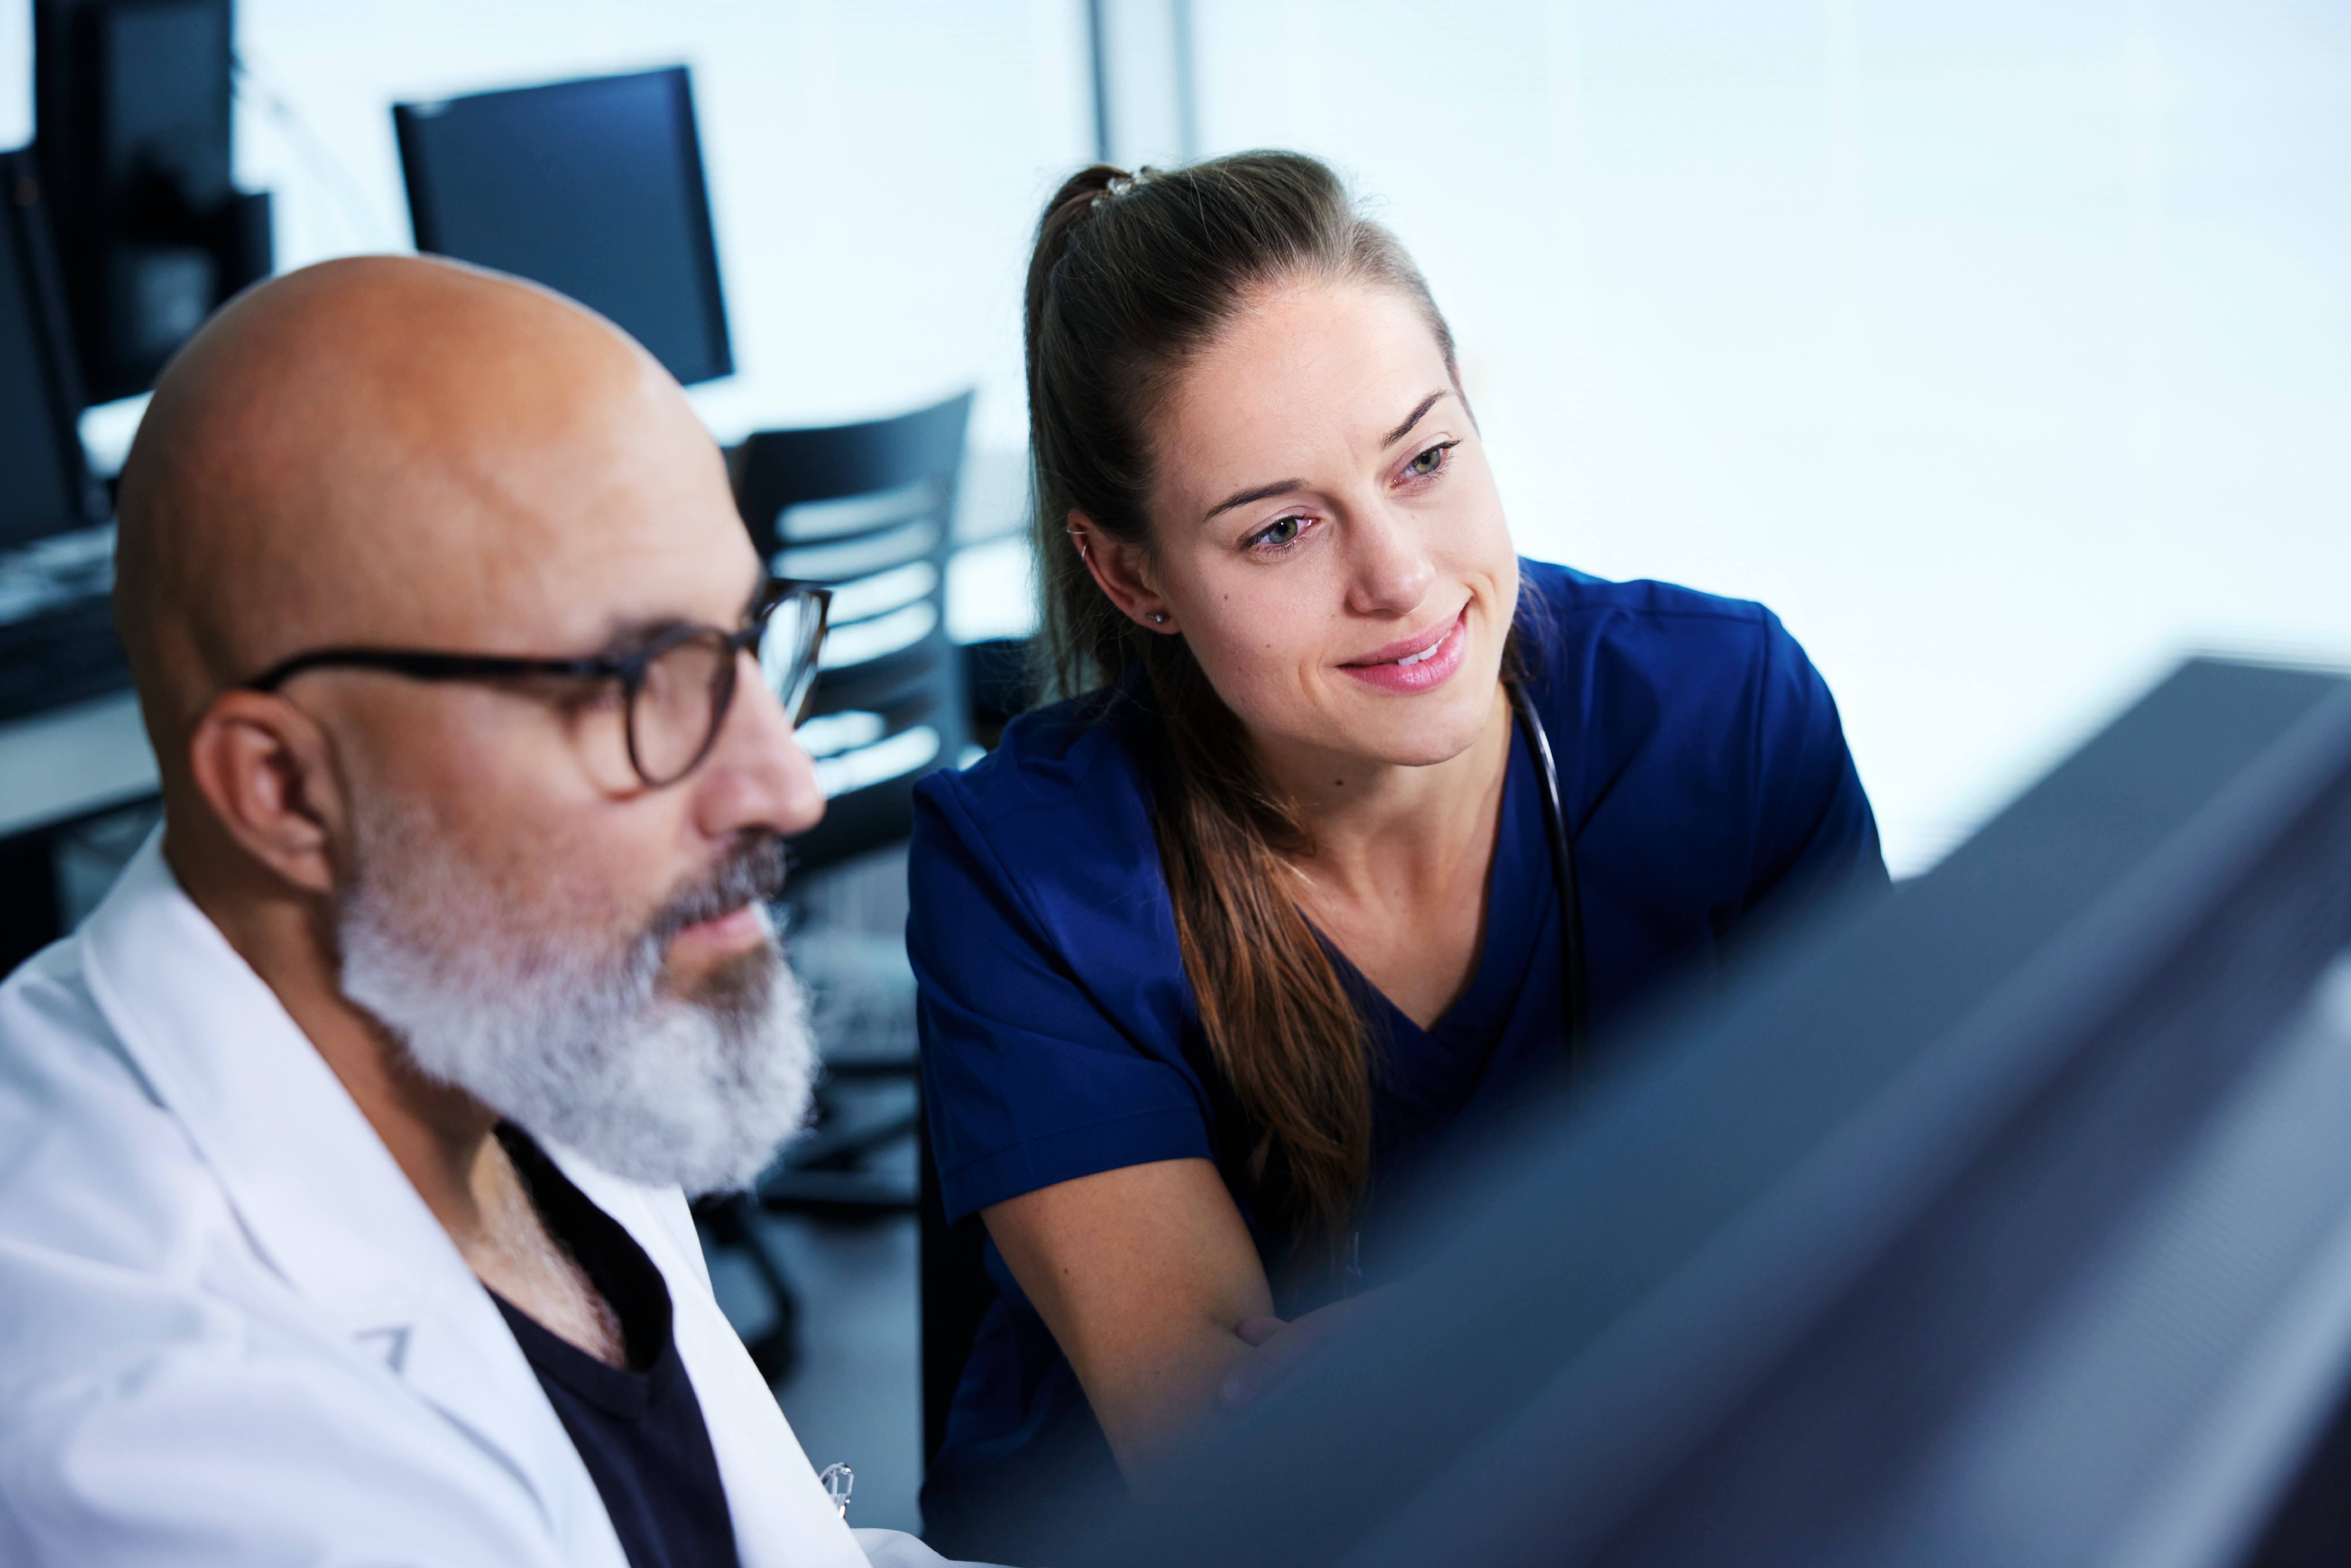 A male and female healthcare worker collaborate while looking at a monitor.